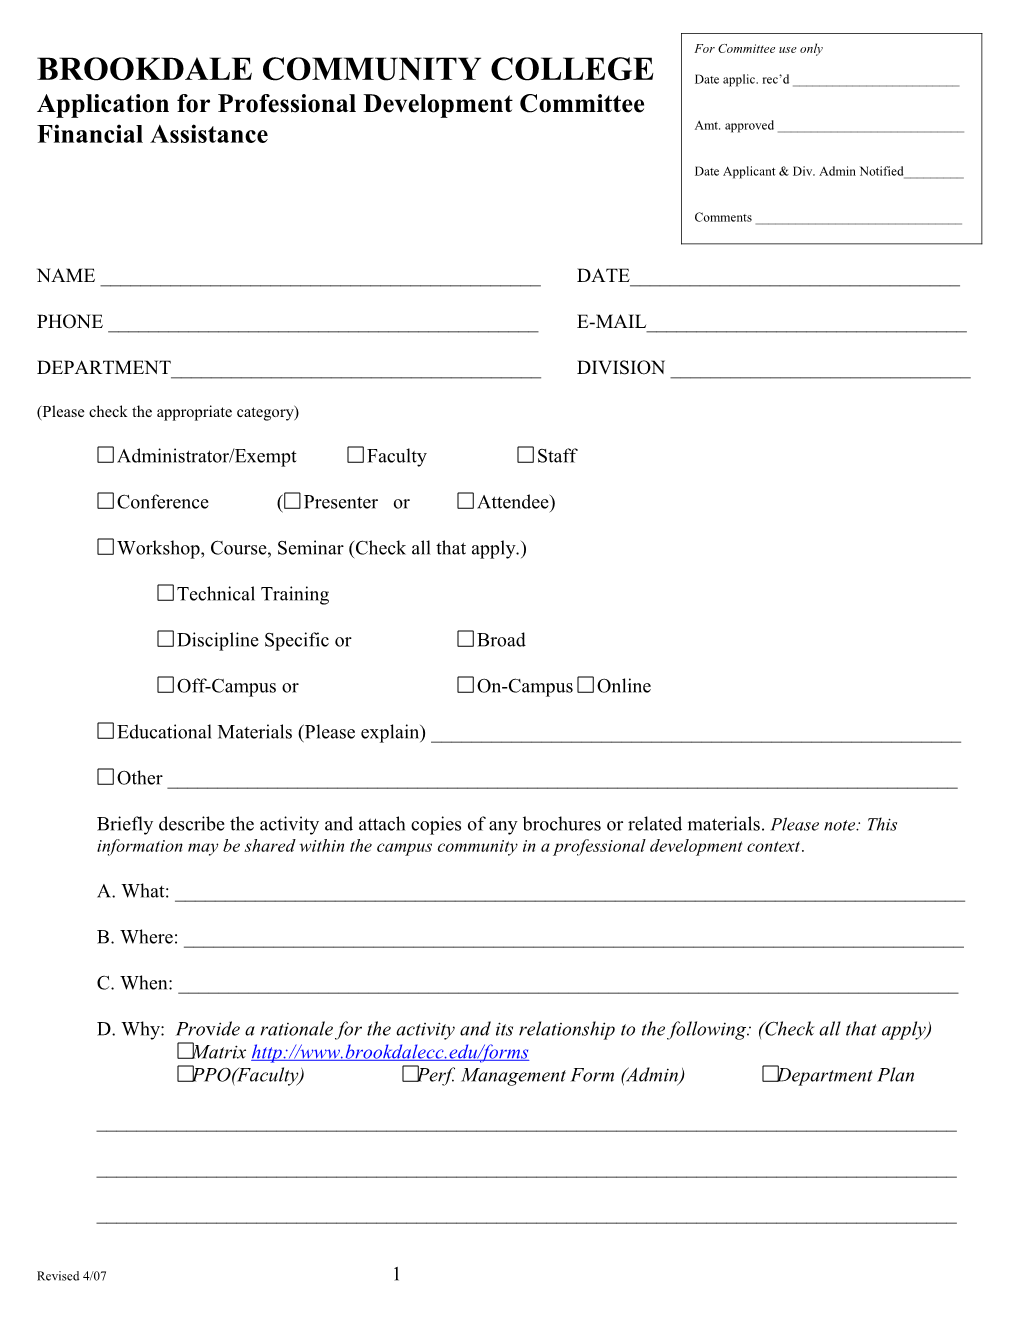 Application for Professional Development Committee